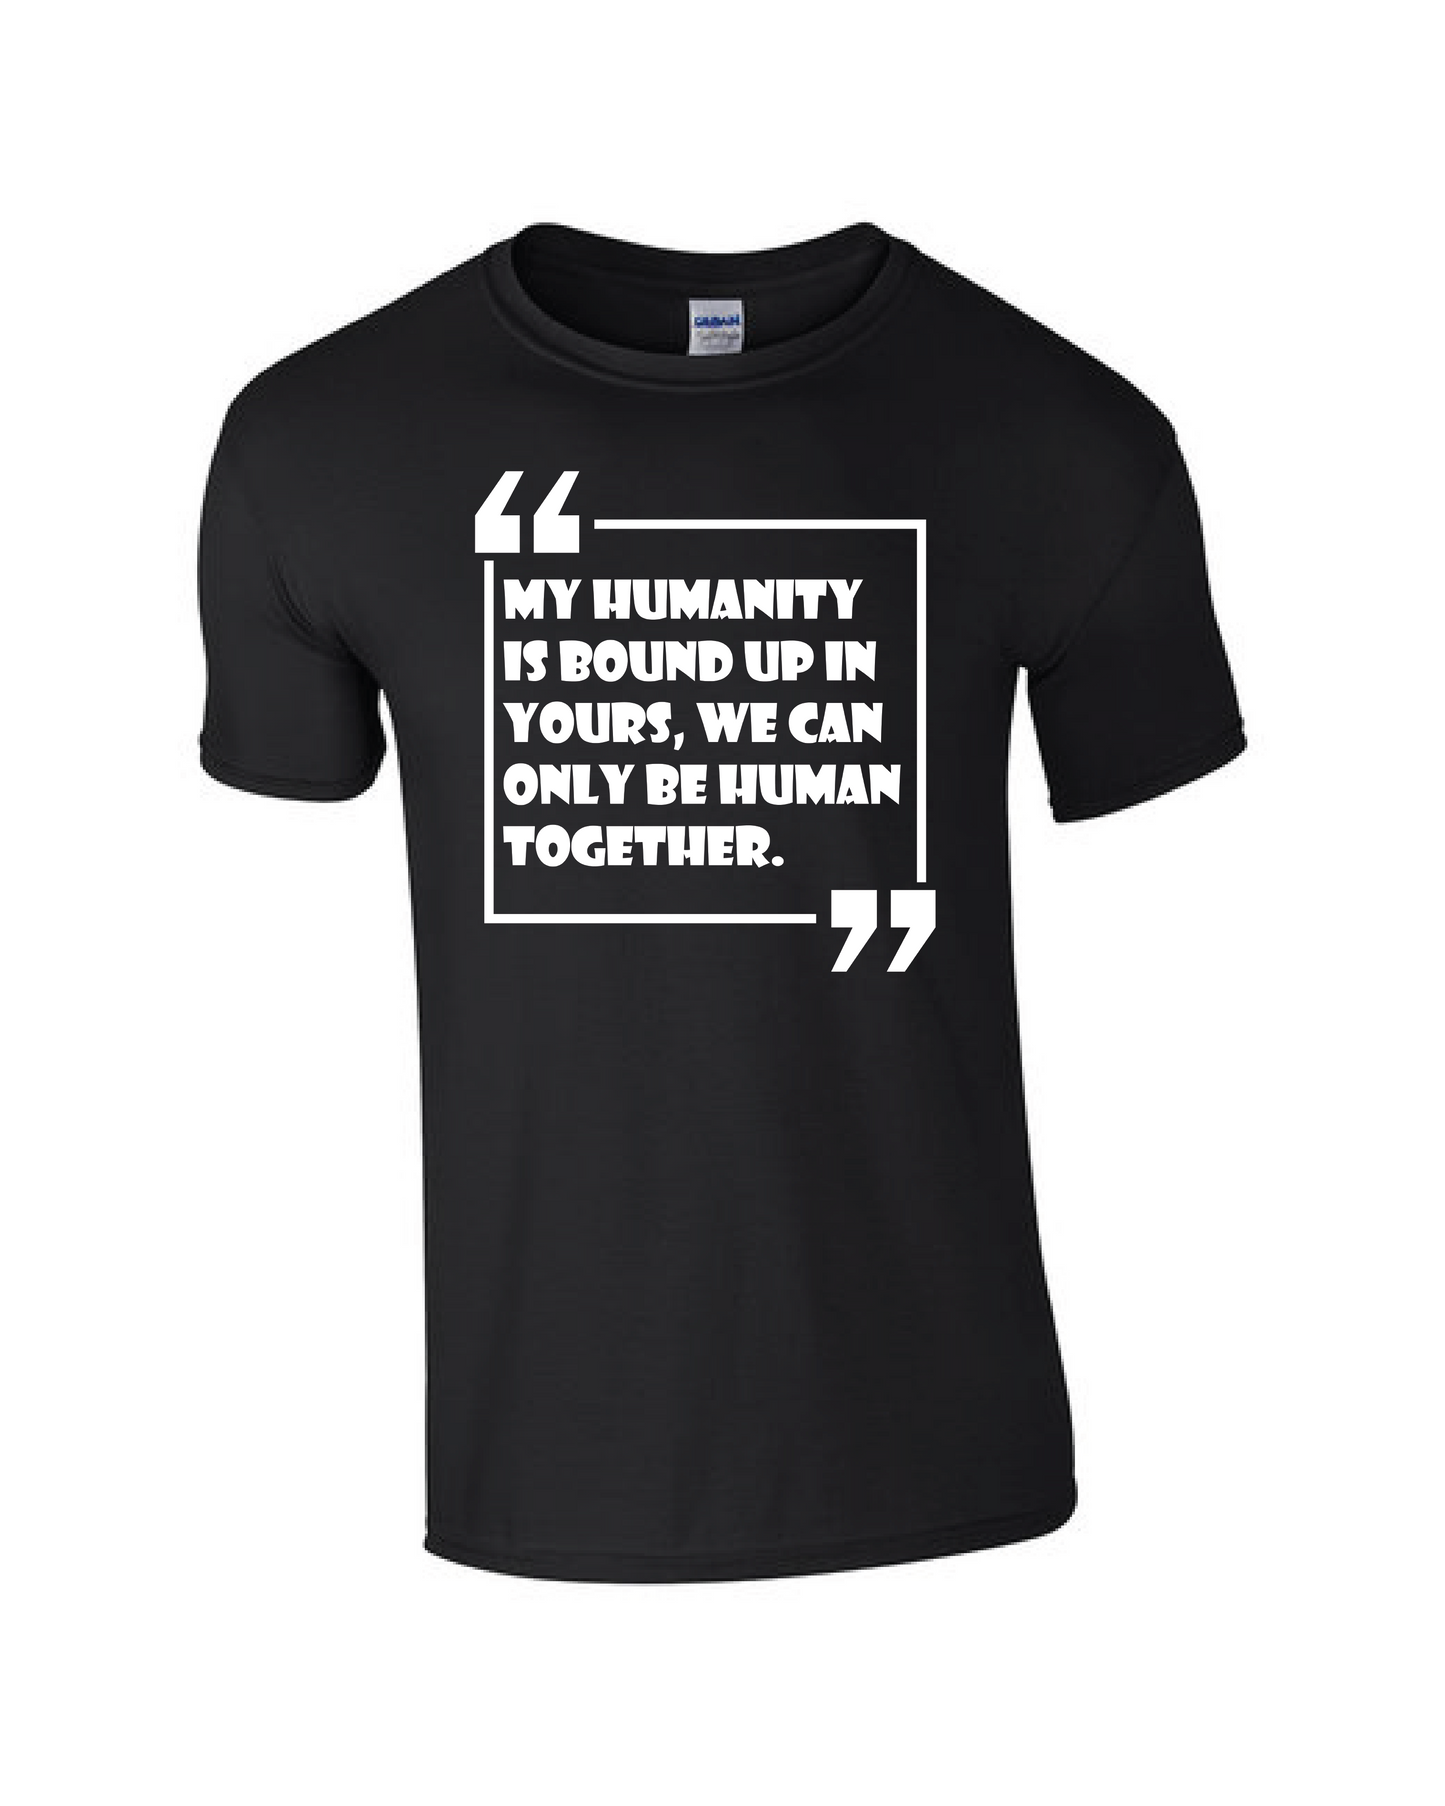 Humanity Quote Tee